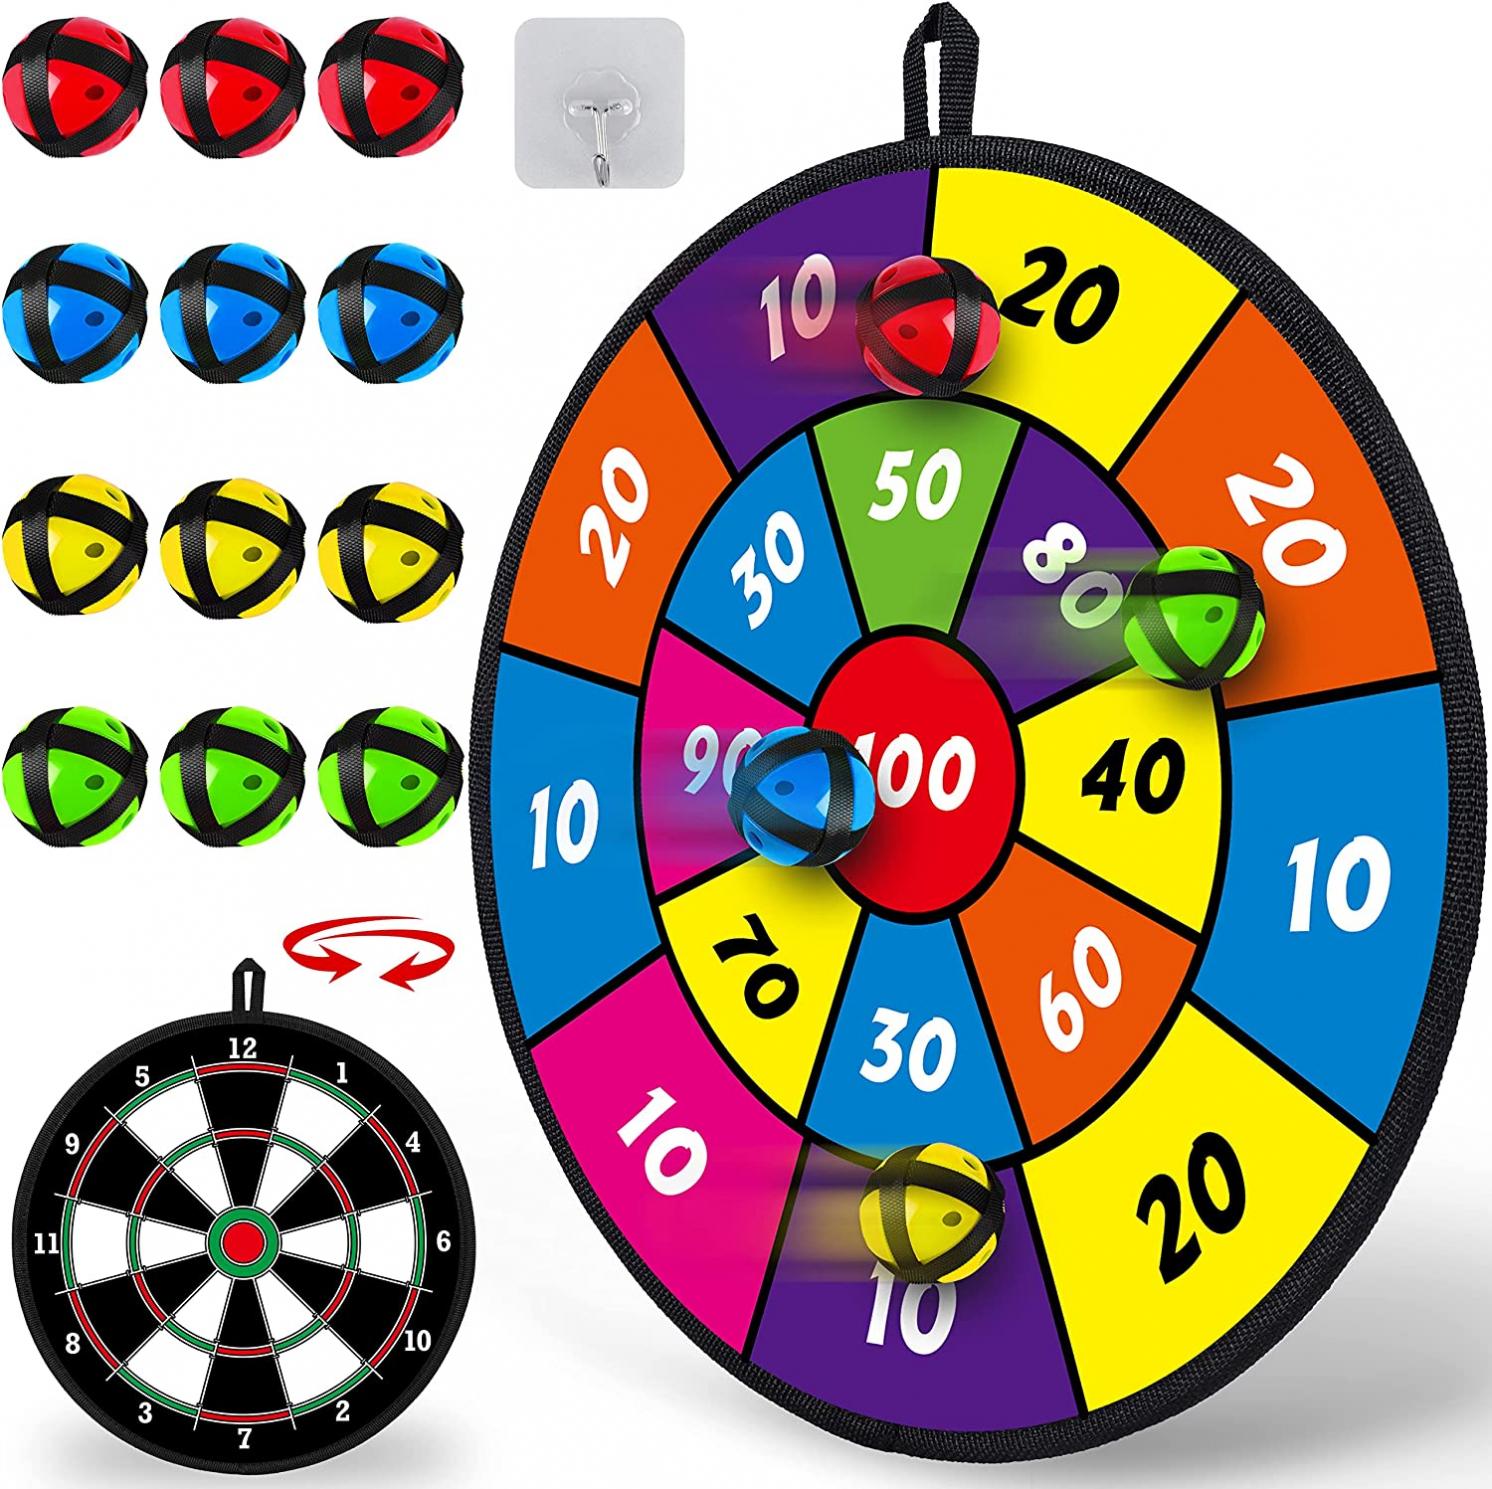 MINIFUN Toy Sports Double Sided Dart Board for Kids, Kids Dart Board with 12 Sticky Balls, Indoor Outdoor Party Play Game Toys, Gifts for 5 6 7 8 9 10 11 12 Year Old Boys Girls